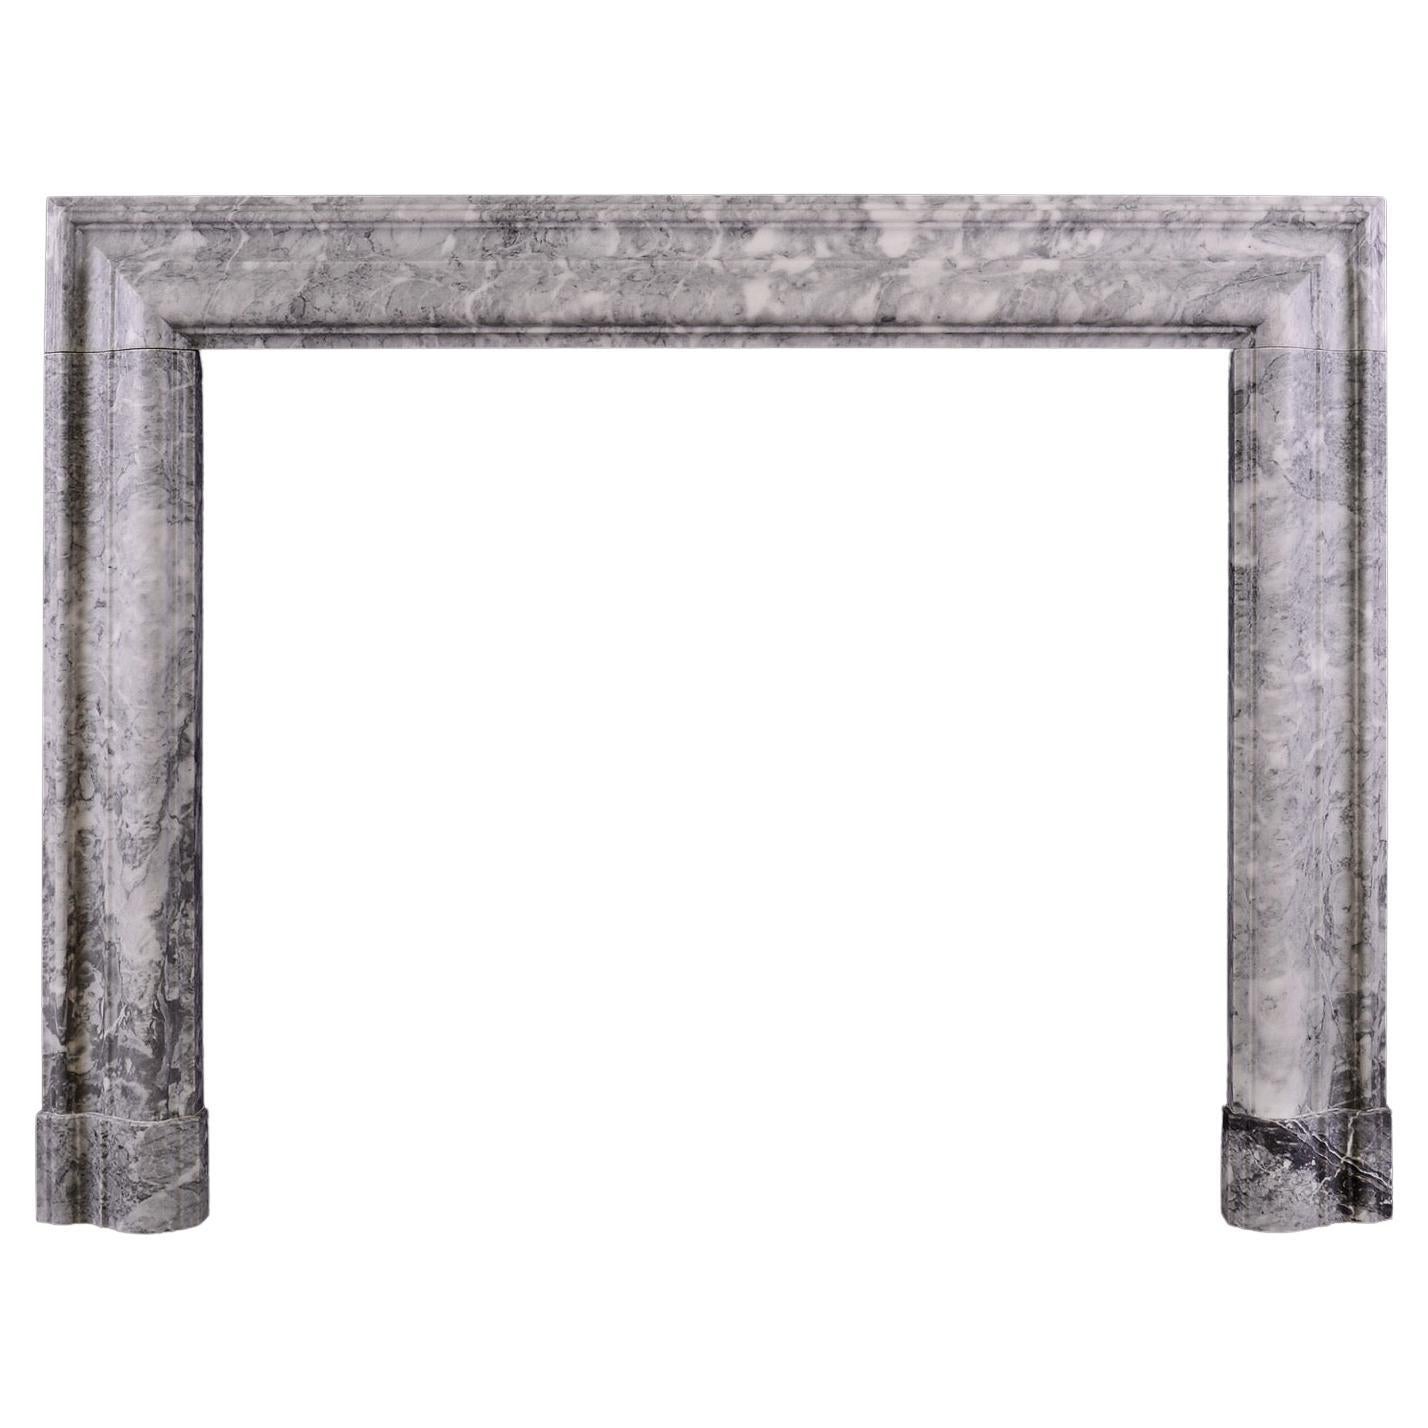 A Grey and White Marble Bolection Fireplace For Sale